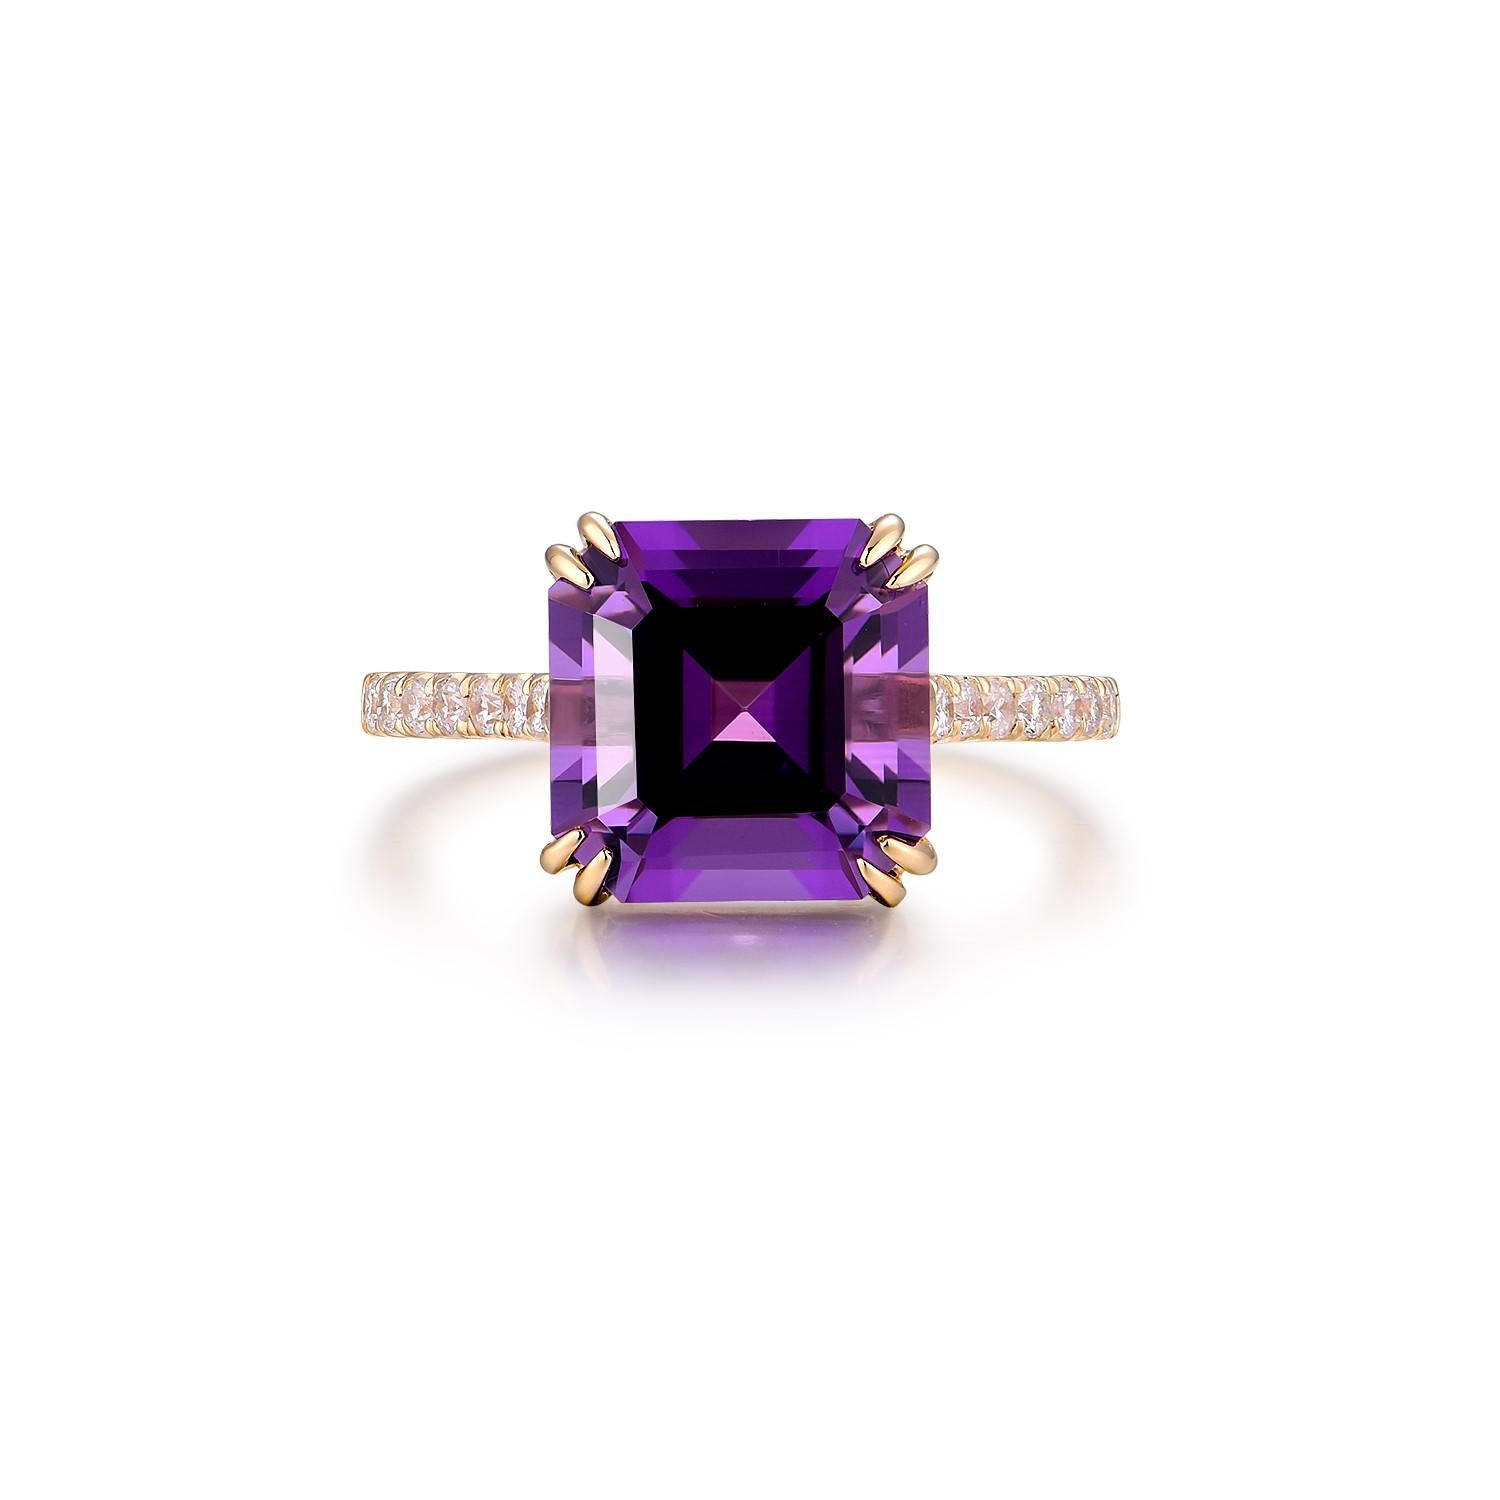 The Asscher Cut Amethyst Diamond Ring is a breathtaking embodiment of opulence and artistry. Set in the timeless expanse of 14K Yellow Gold, this exquisite piece is centered around a stunning 4.49ct Asscher cut amethyst. The deep purple hue of the